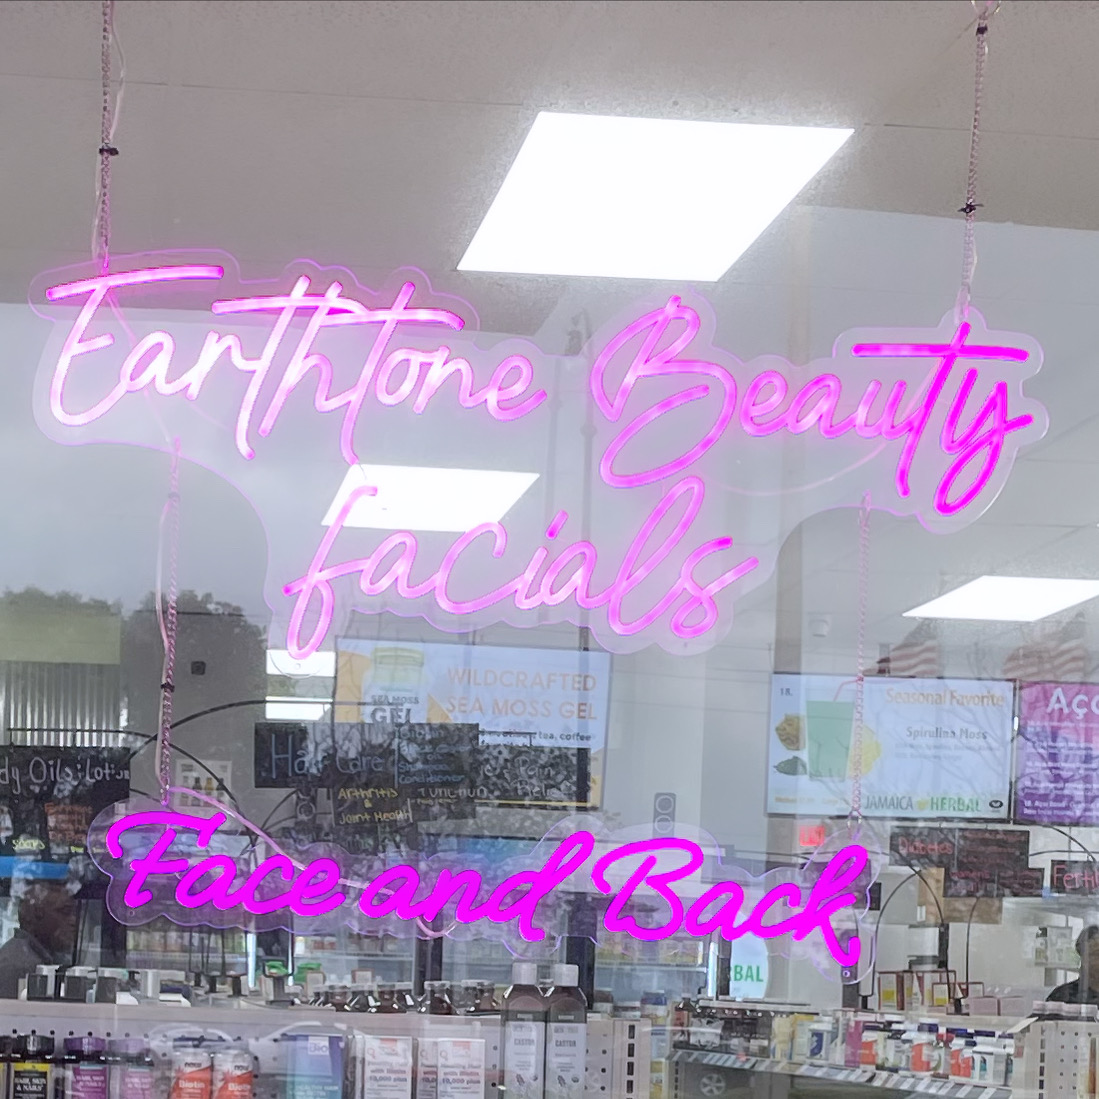 Earthtone Beauty and Skin Care 4273 N State Rd 7, Lauderdale Lakes Florida 33319